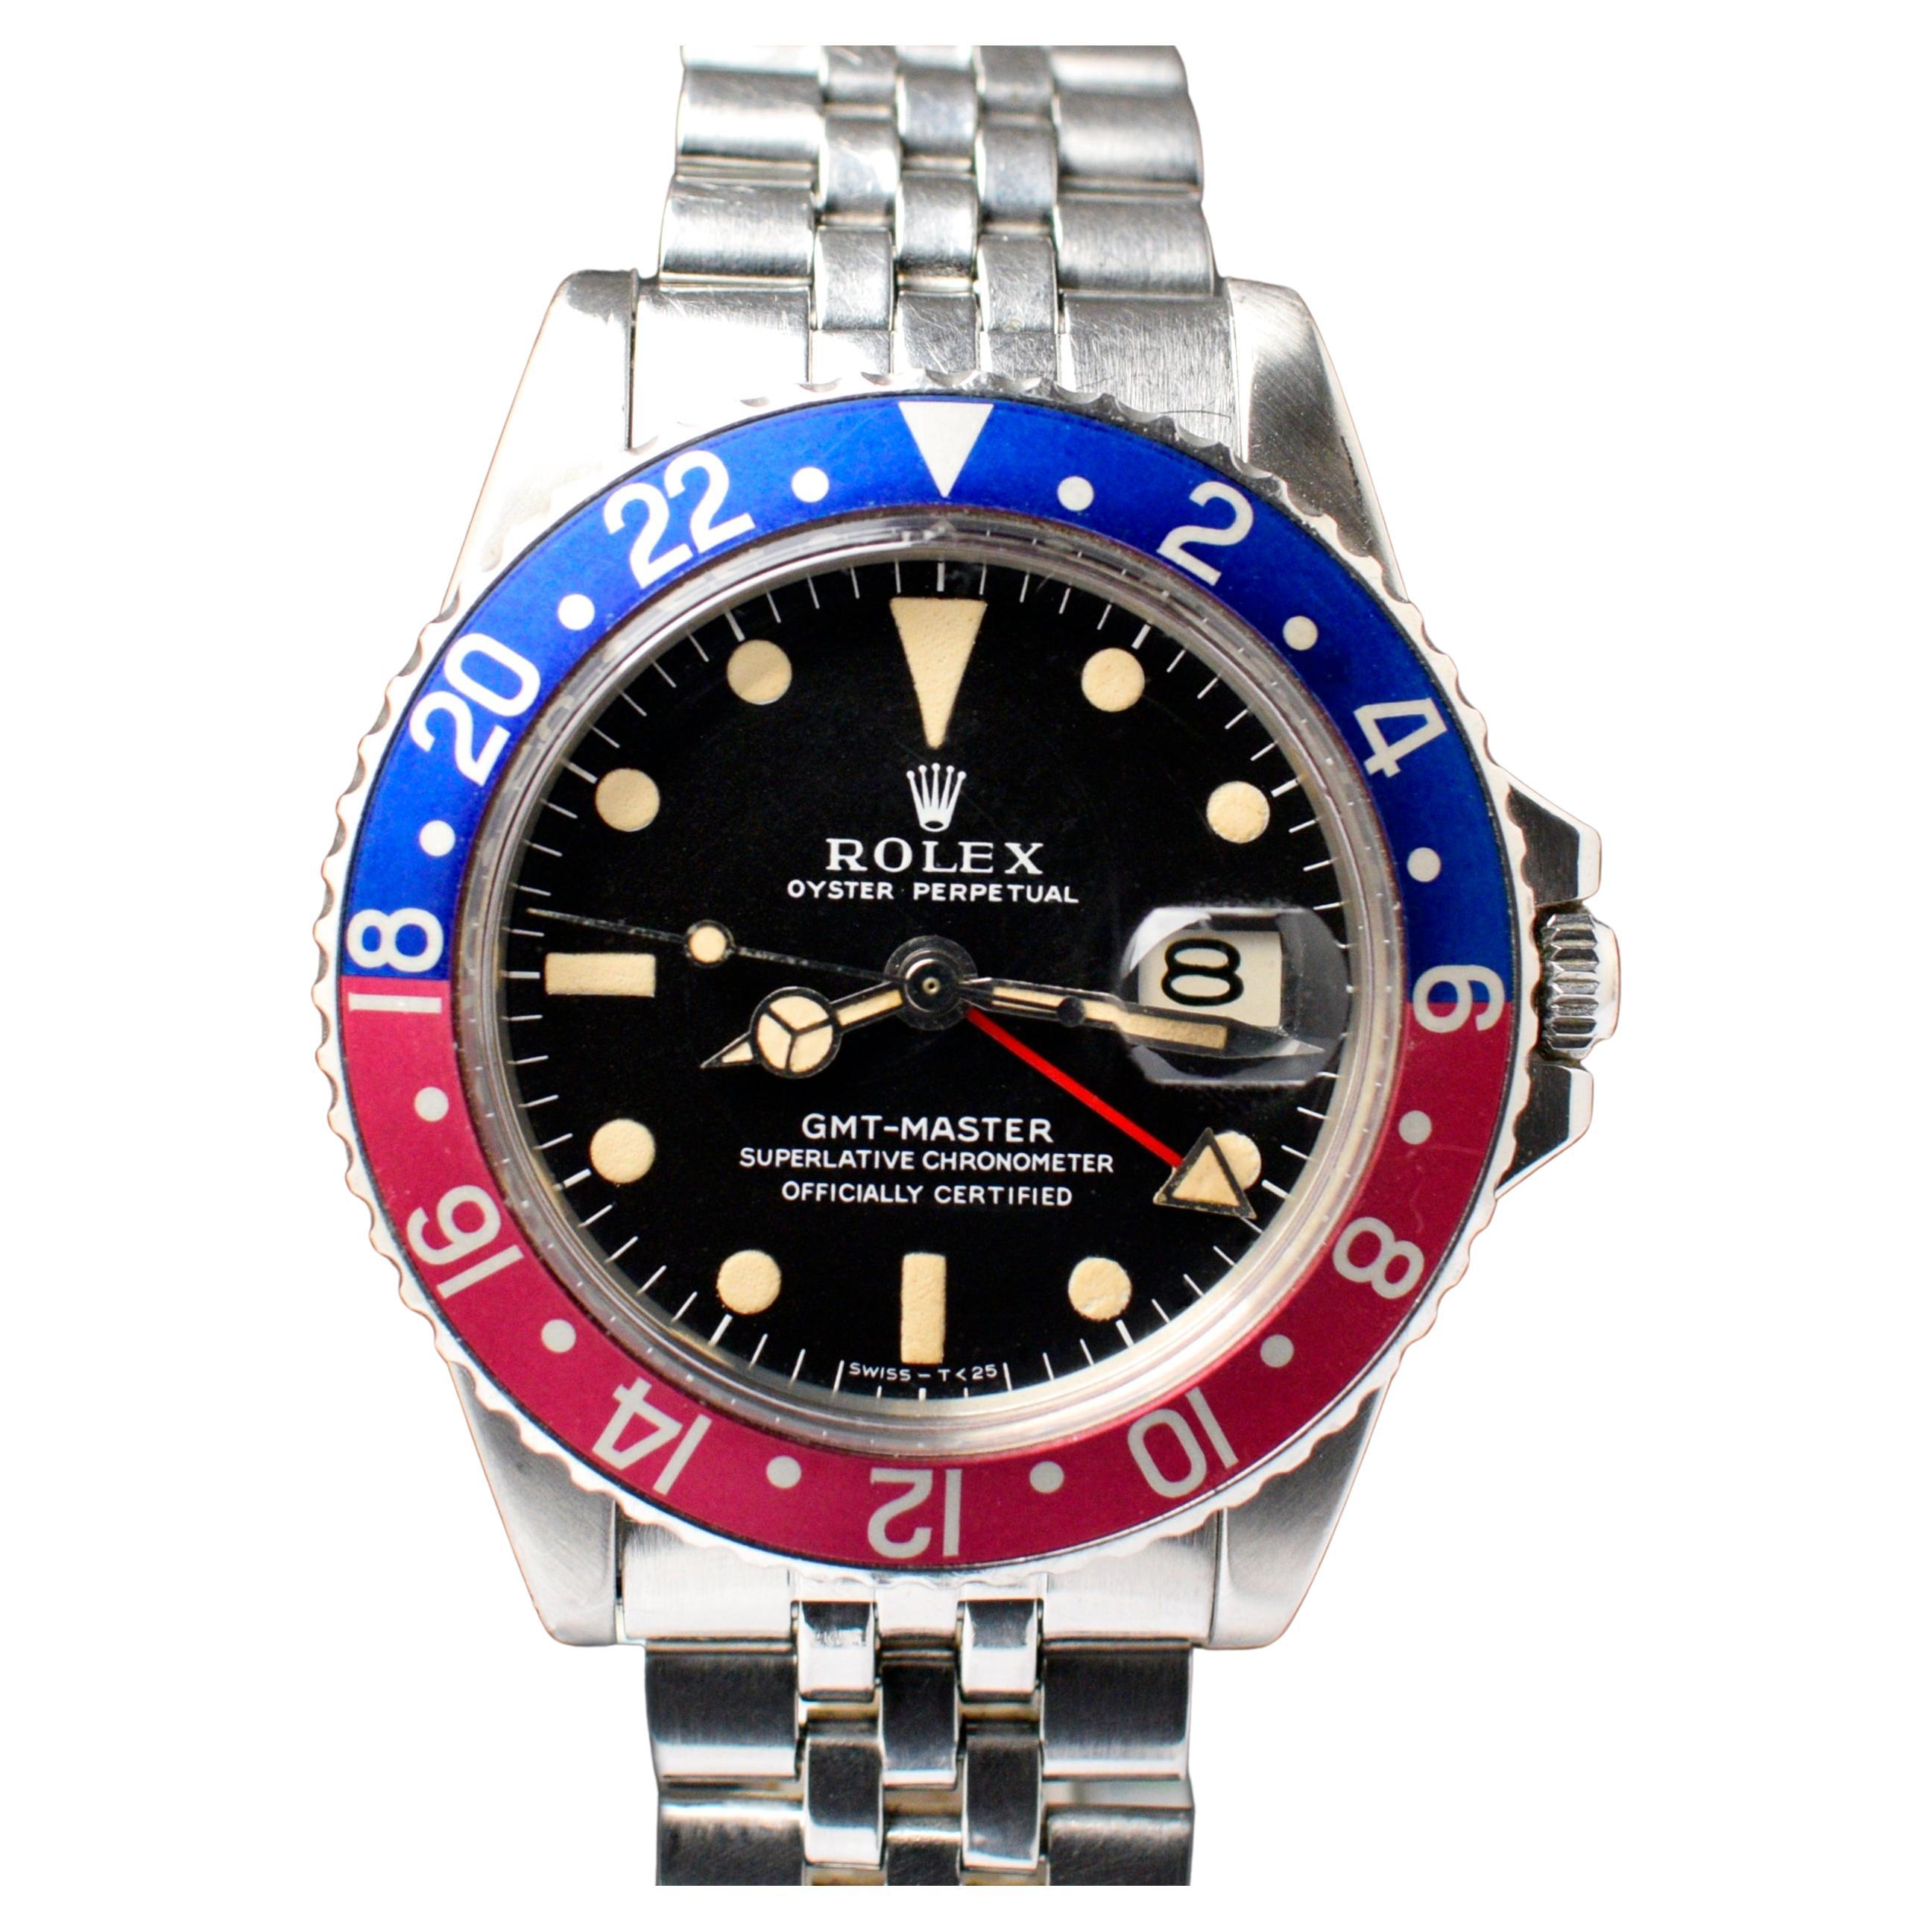 Rolex GMT-Master Blue Red Pepsi Matte Dial 1675 Steel Automatic Watch, 1968